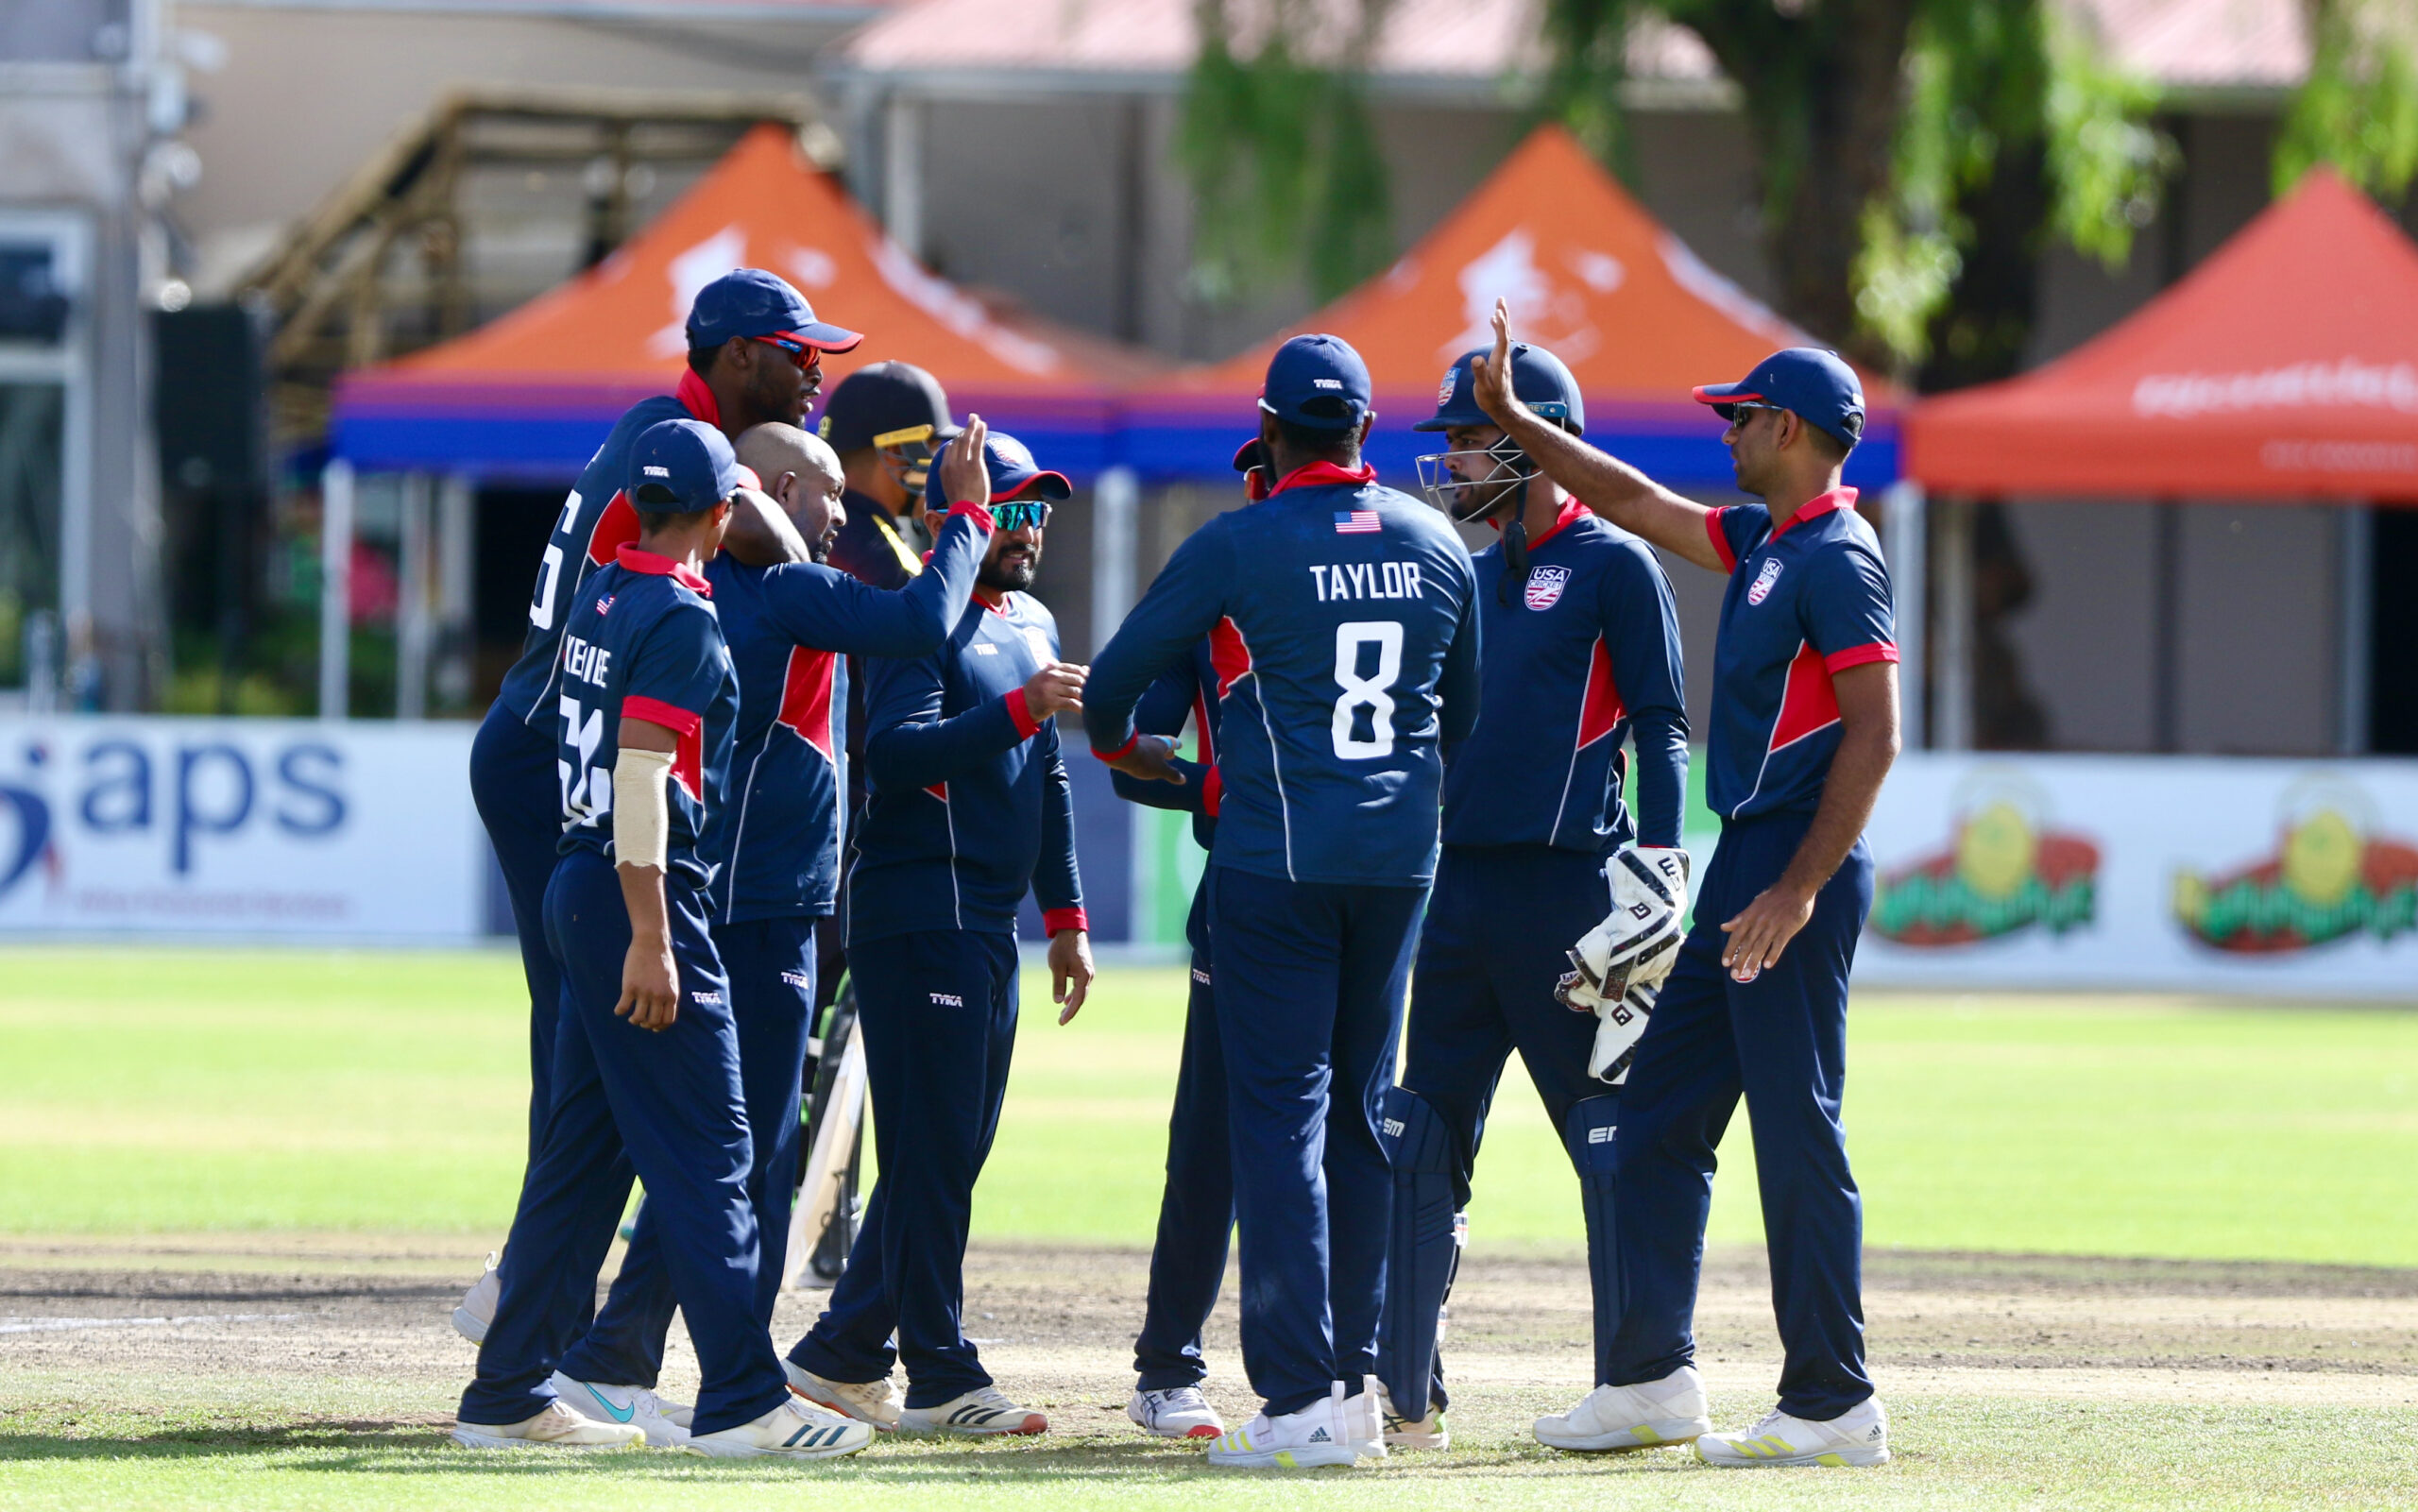 USA CRICKET SEEKS EXPRESSIONS OF INTEREST FOR NATIONAL TEAM SELECTORS